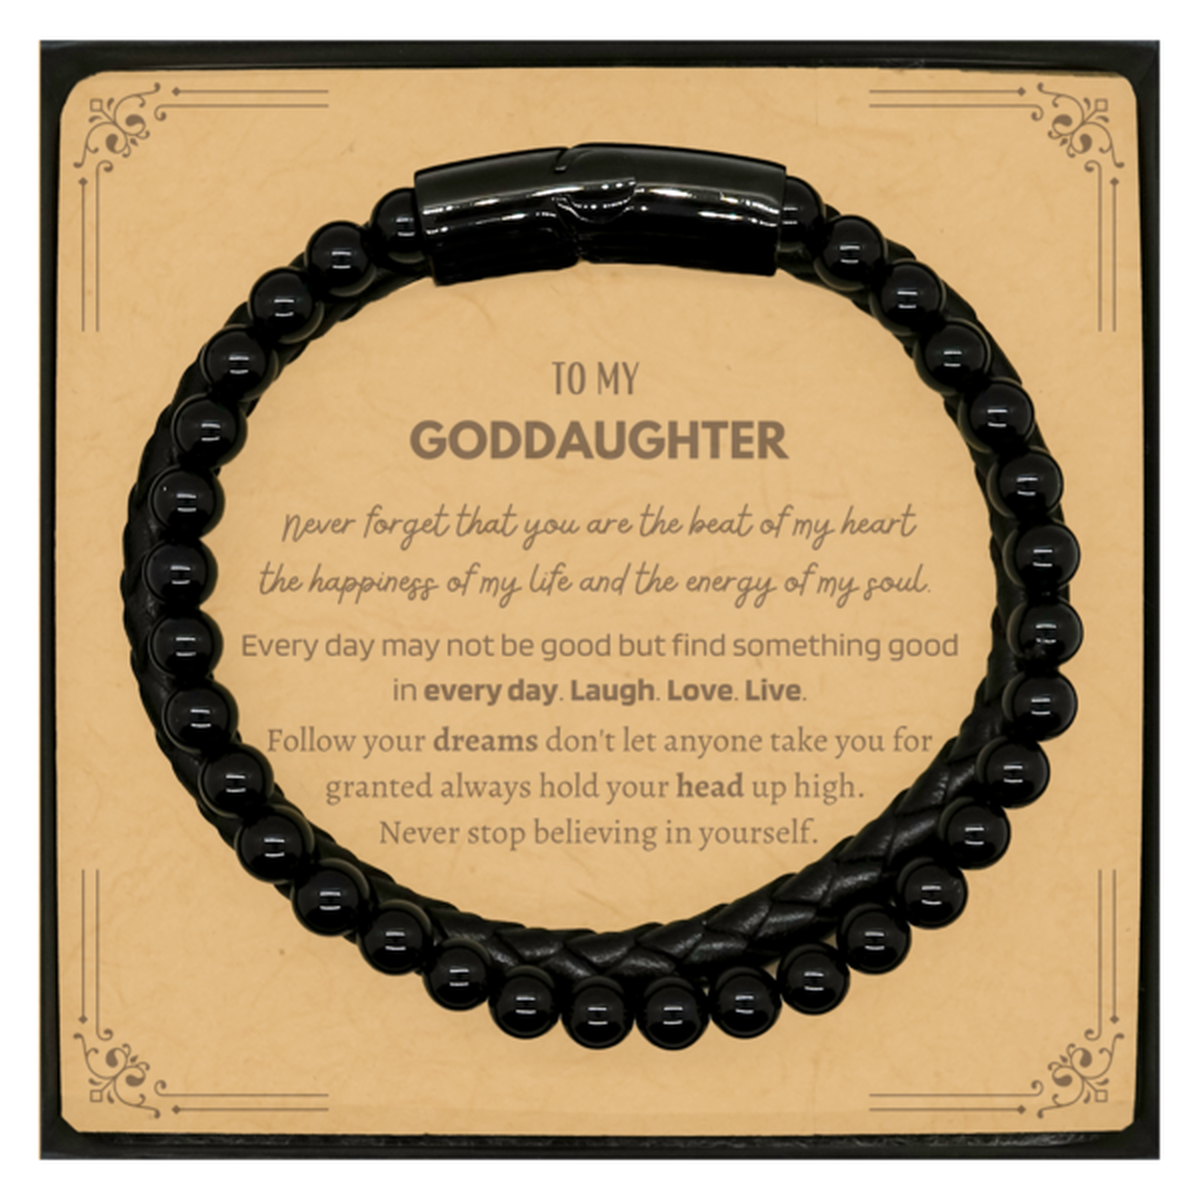 To My Goddaughter Message Card Gifts, Christmas Goddaughter Stone Leather Bracelets Present, Birthday Unique Motivational For Goddaughter, To My Goddaughter Never forget that you are the beat of my heart the happiness of my life and the energy of my soul